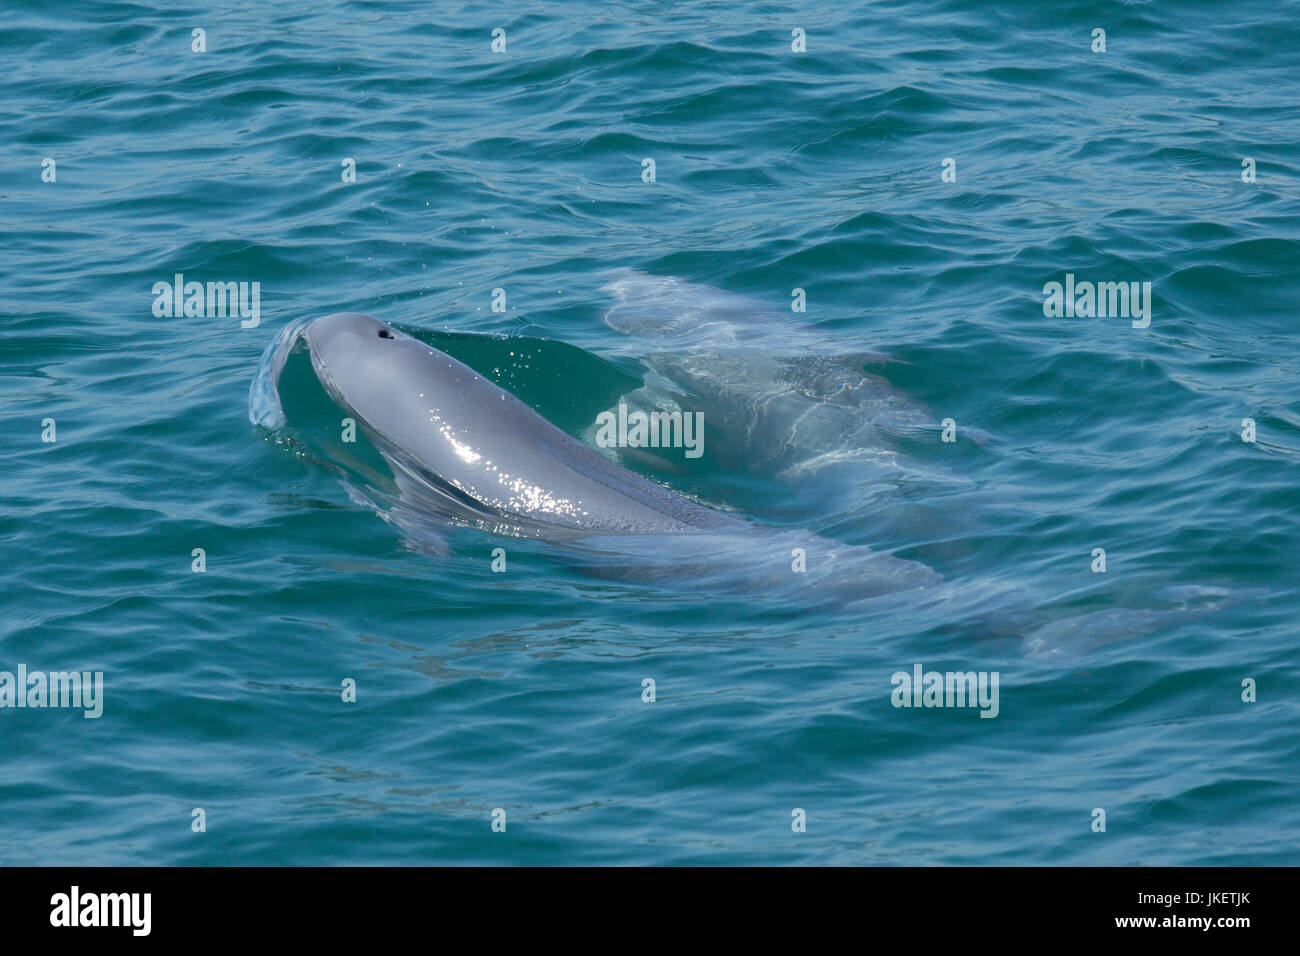 Indo-Pacific Finless Porpoises (Neophocaena phocaenoides), a not-so-well-known species in Hong Kong waters. They feed on squid and small fish. Stock Photo